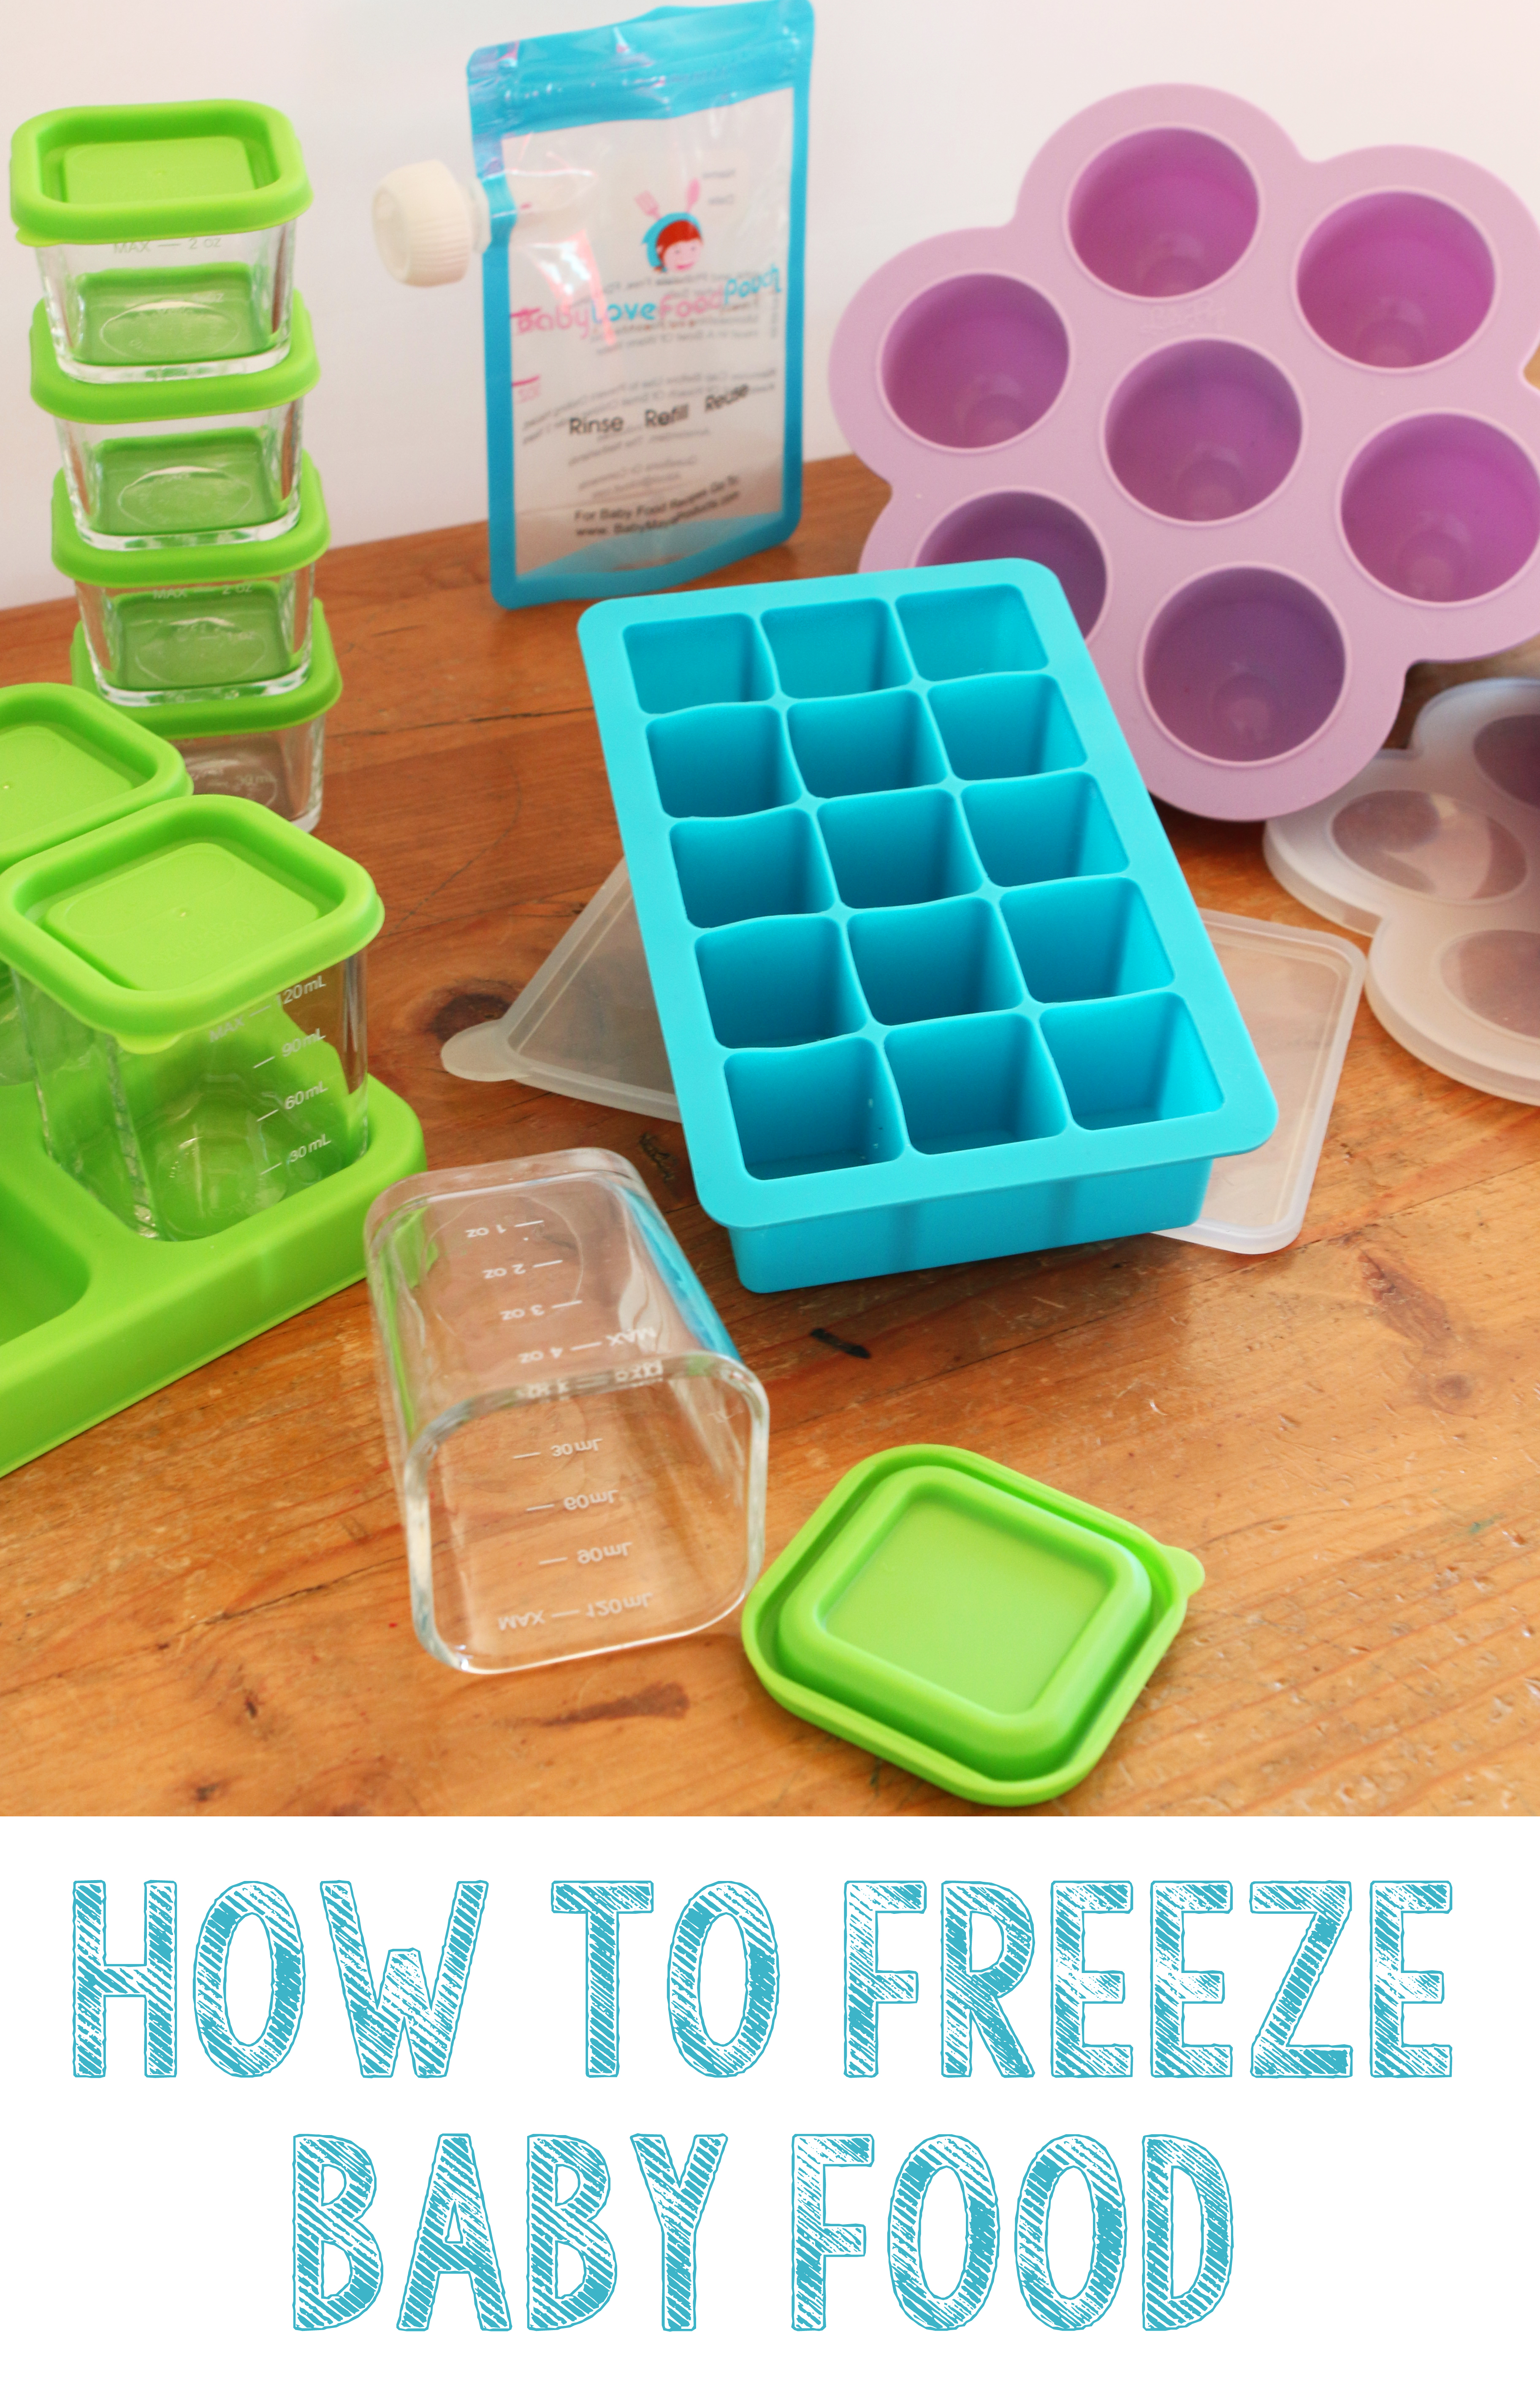 Containers For Freezing Food